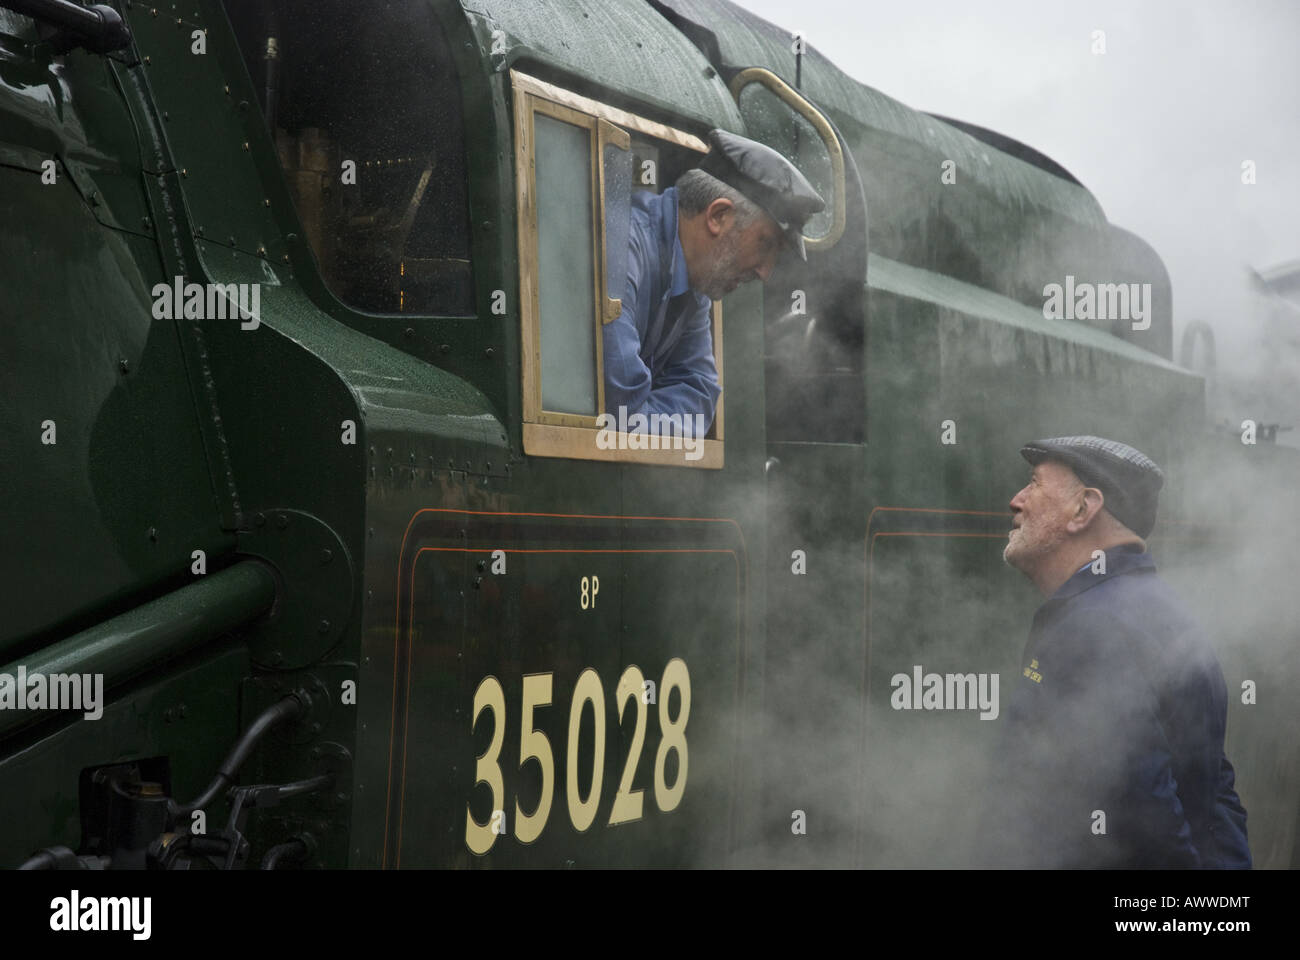 An onlooker talks with the engineer of the Orient Express steam train at London's Victoria Station, UK. Stock Photo